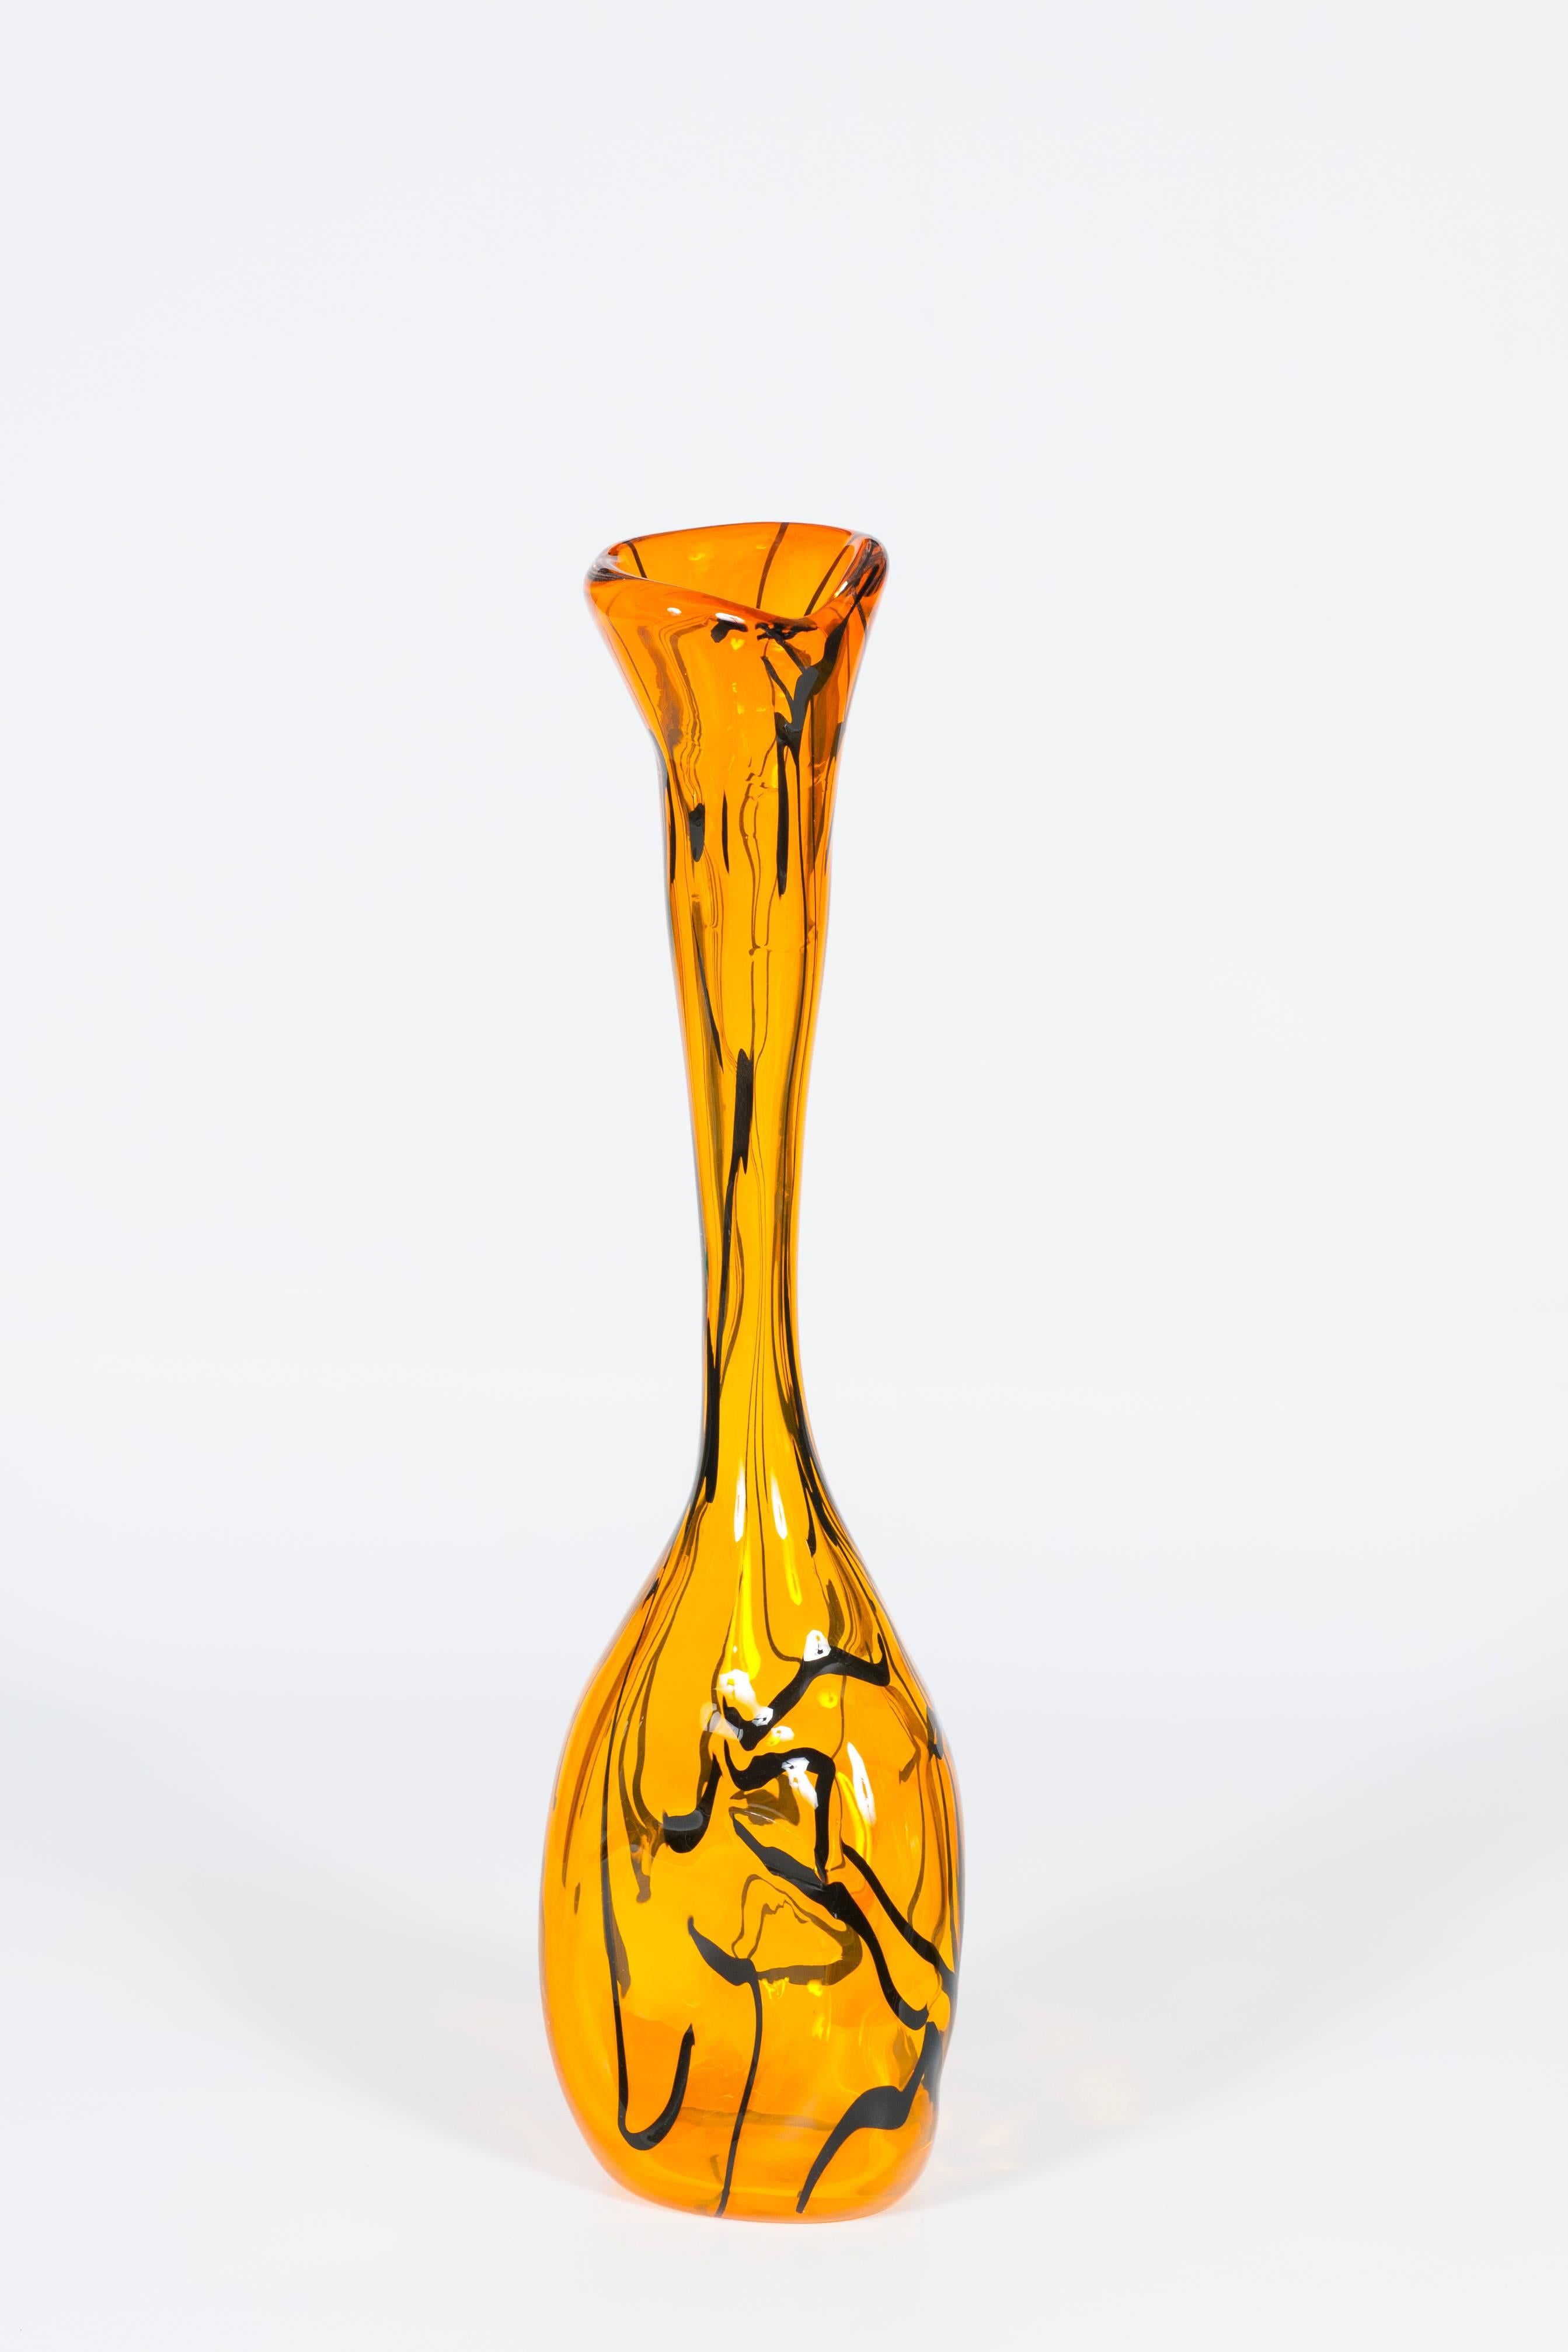 Amazing Italian Venetian, modern vase, blown Murano glass, orange, black stripes, 1990s. Manufactured by blowing the glass by following the school of the best Murano glass makers. Its shape represent the modern society, spontaneous escaping from the